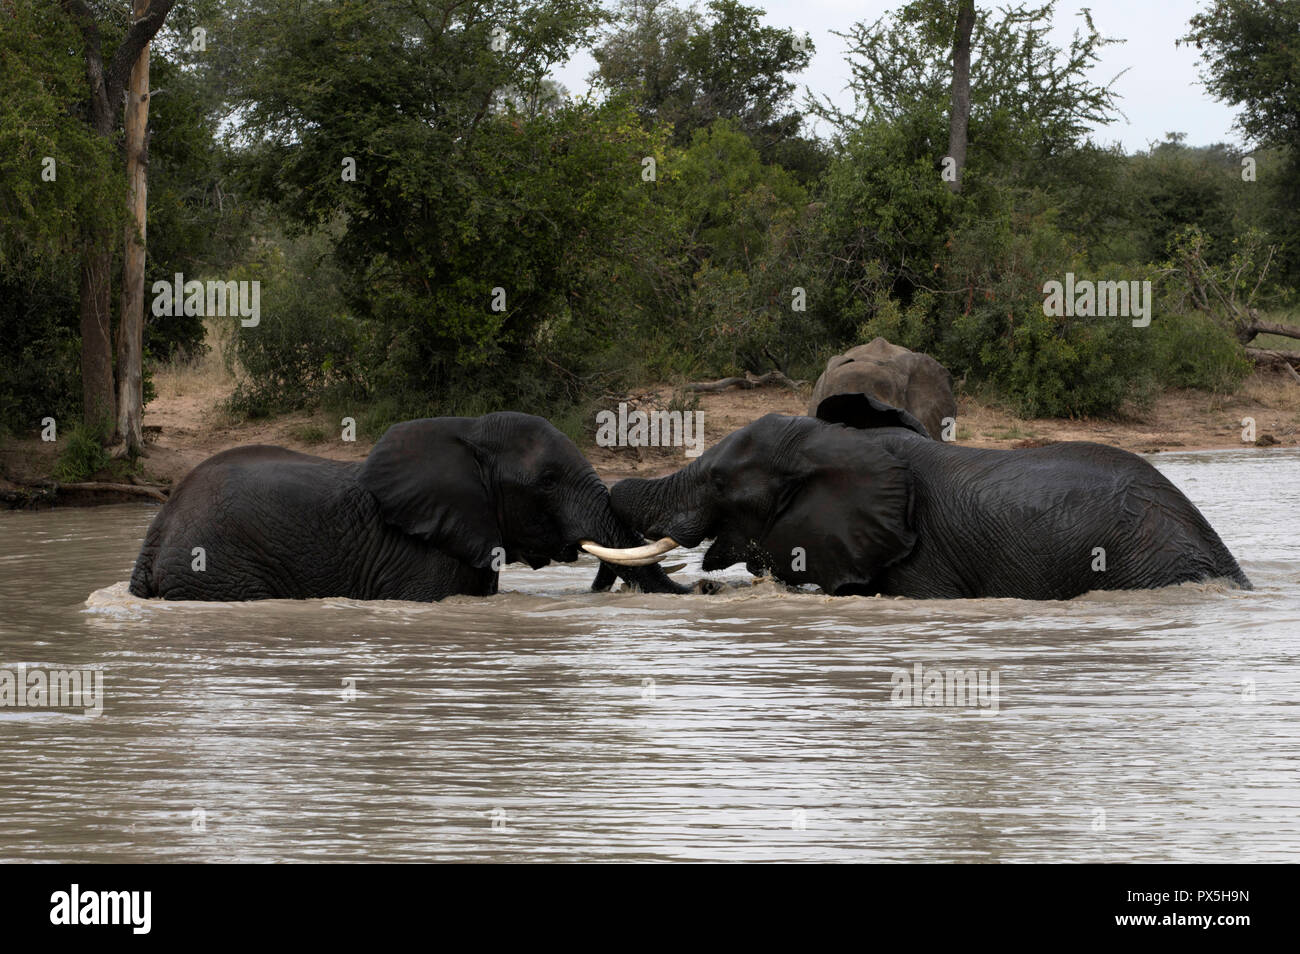 Kruger National Park.   African Elephants (Loxodonta africana) fignting in water. South Africa. Stock Photo